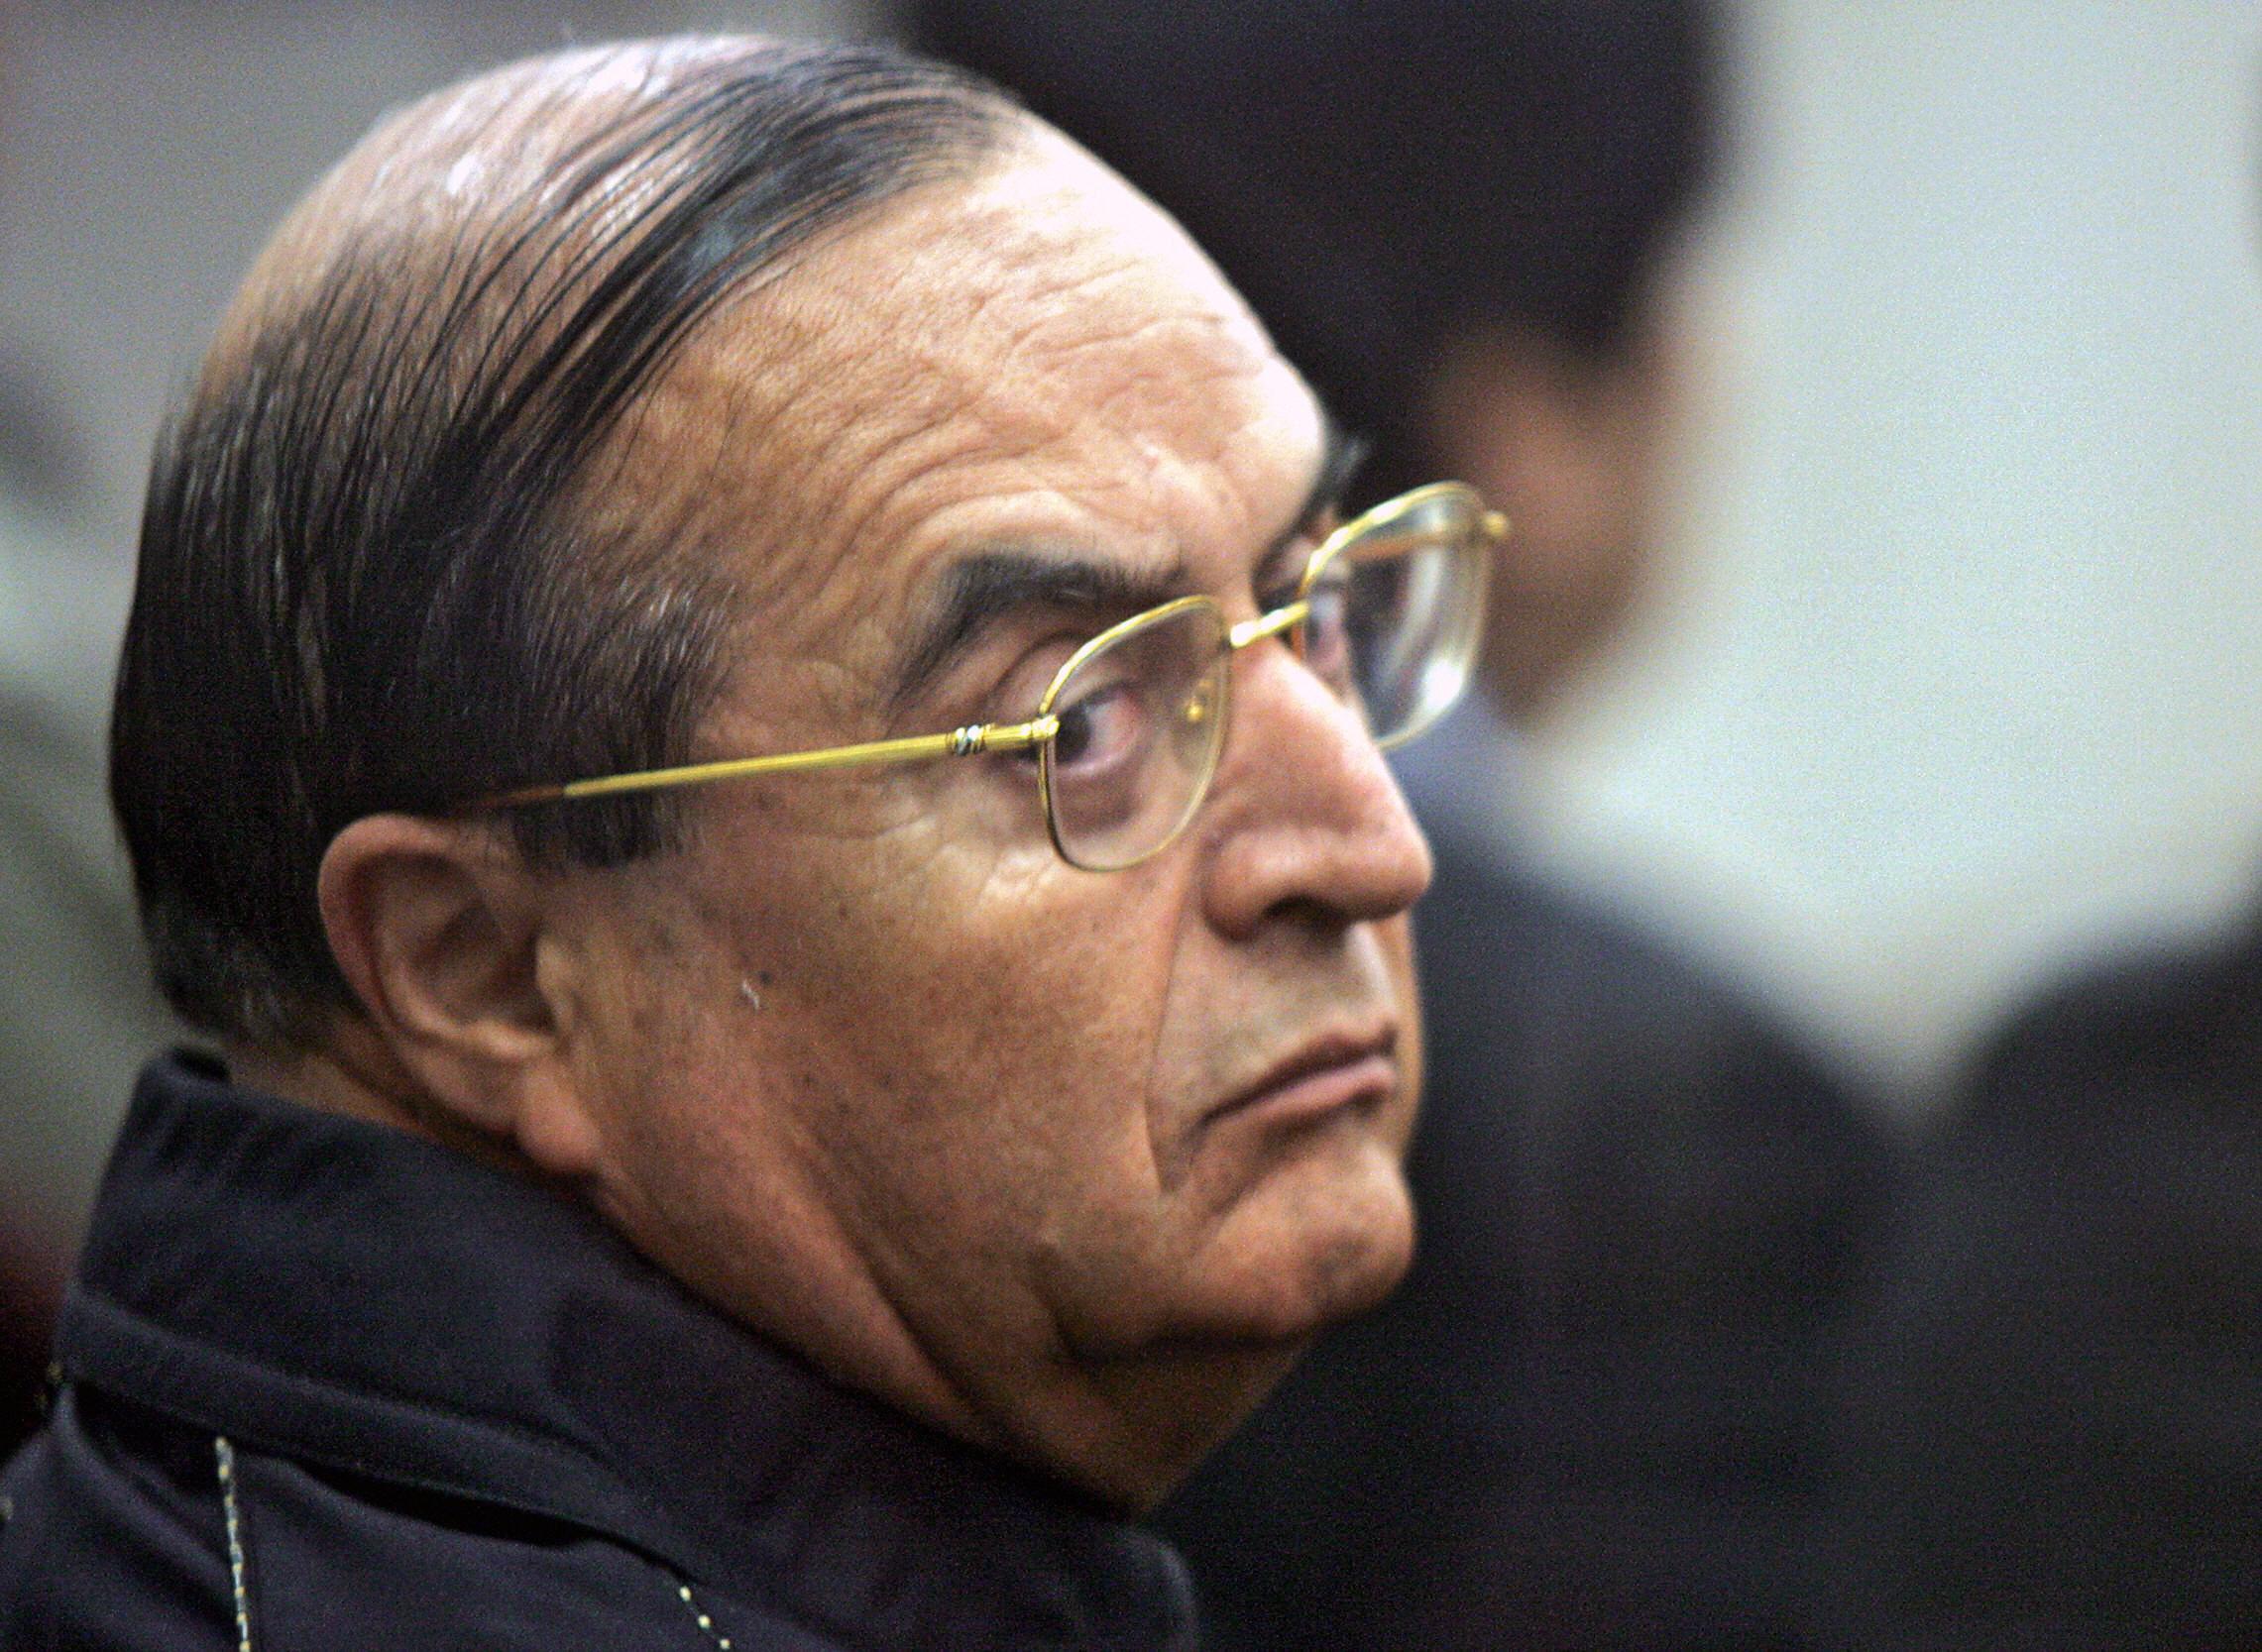 Lima, PERU:  Vladimiro Montesinos, ex-right hand of ex Peruvian President Alberto Fujimori (1990-2000), looks at his lawyer Estela Valdivia (out of frame) during a trial session at Callao Naval Base, 21 September 2006 in Lima. After two years and eight months of trial, Montesinos is expected to be sentenced today for charges on arm trading to the Revolutionary Armed Forces of Colombia (FARC) guerrilla in 1999. AFP PHOTO/Eitan ABRAMOVICH   (Photo credit should read EITAN ABRAMOVICH/AFP/Getty Images)